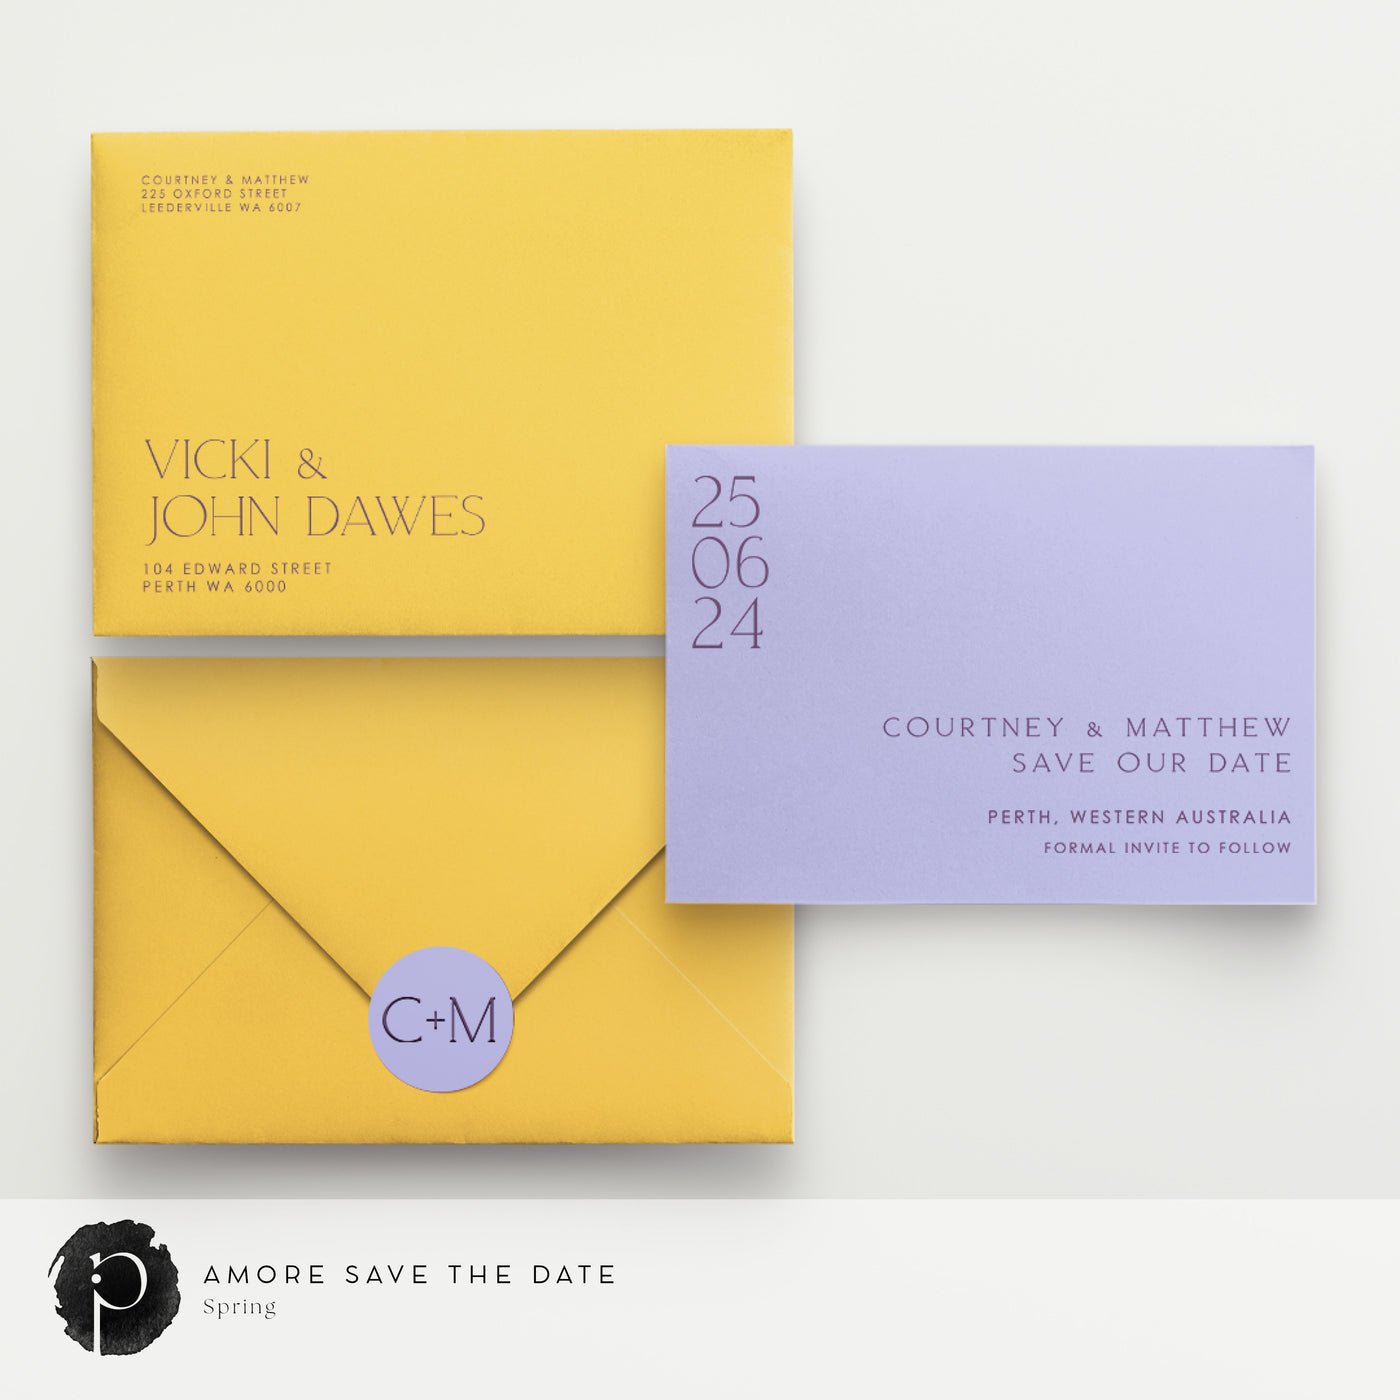 Amore - Save The Date Cards